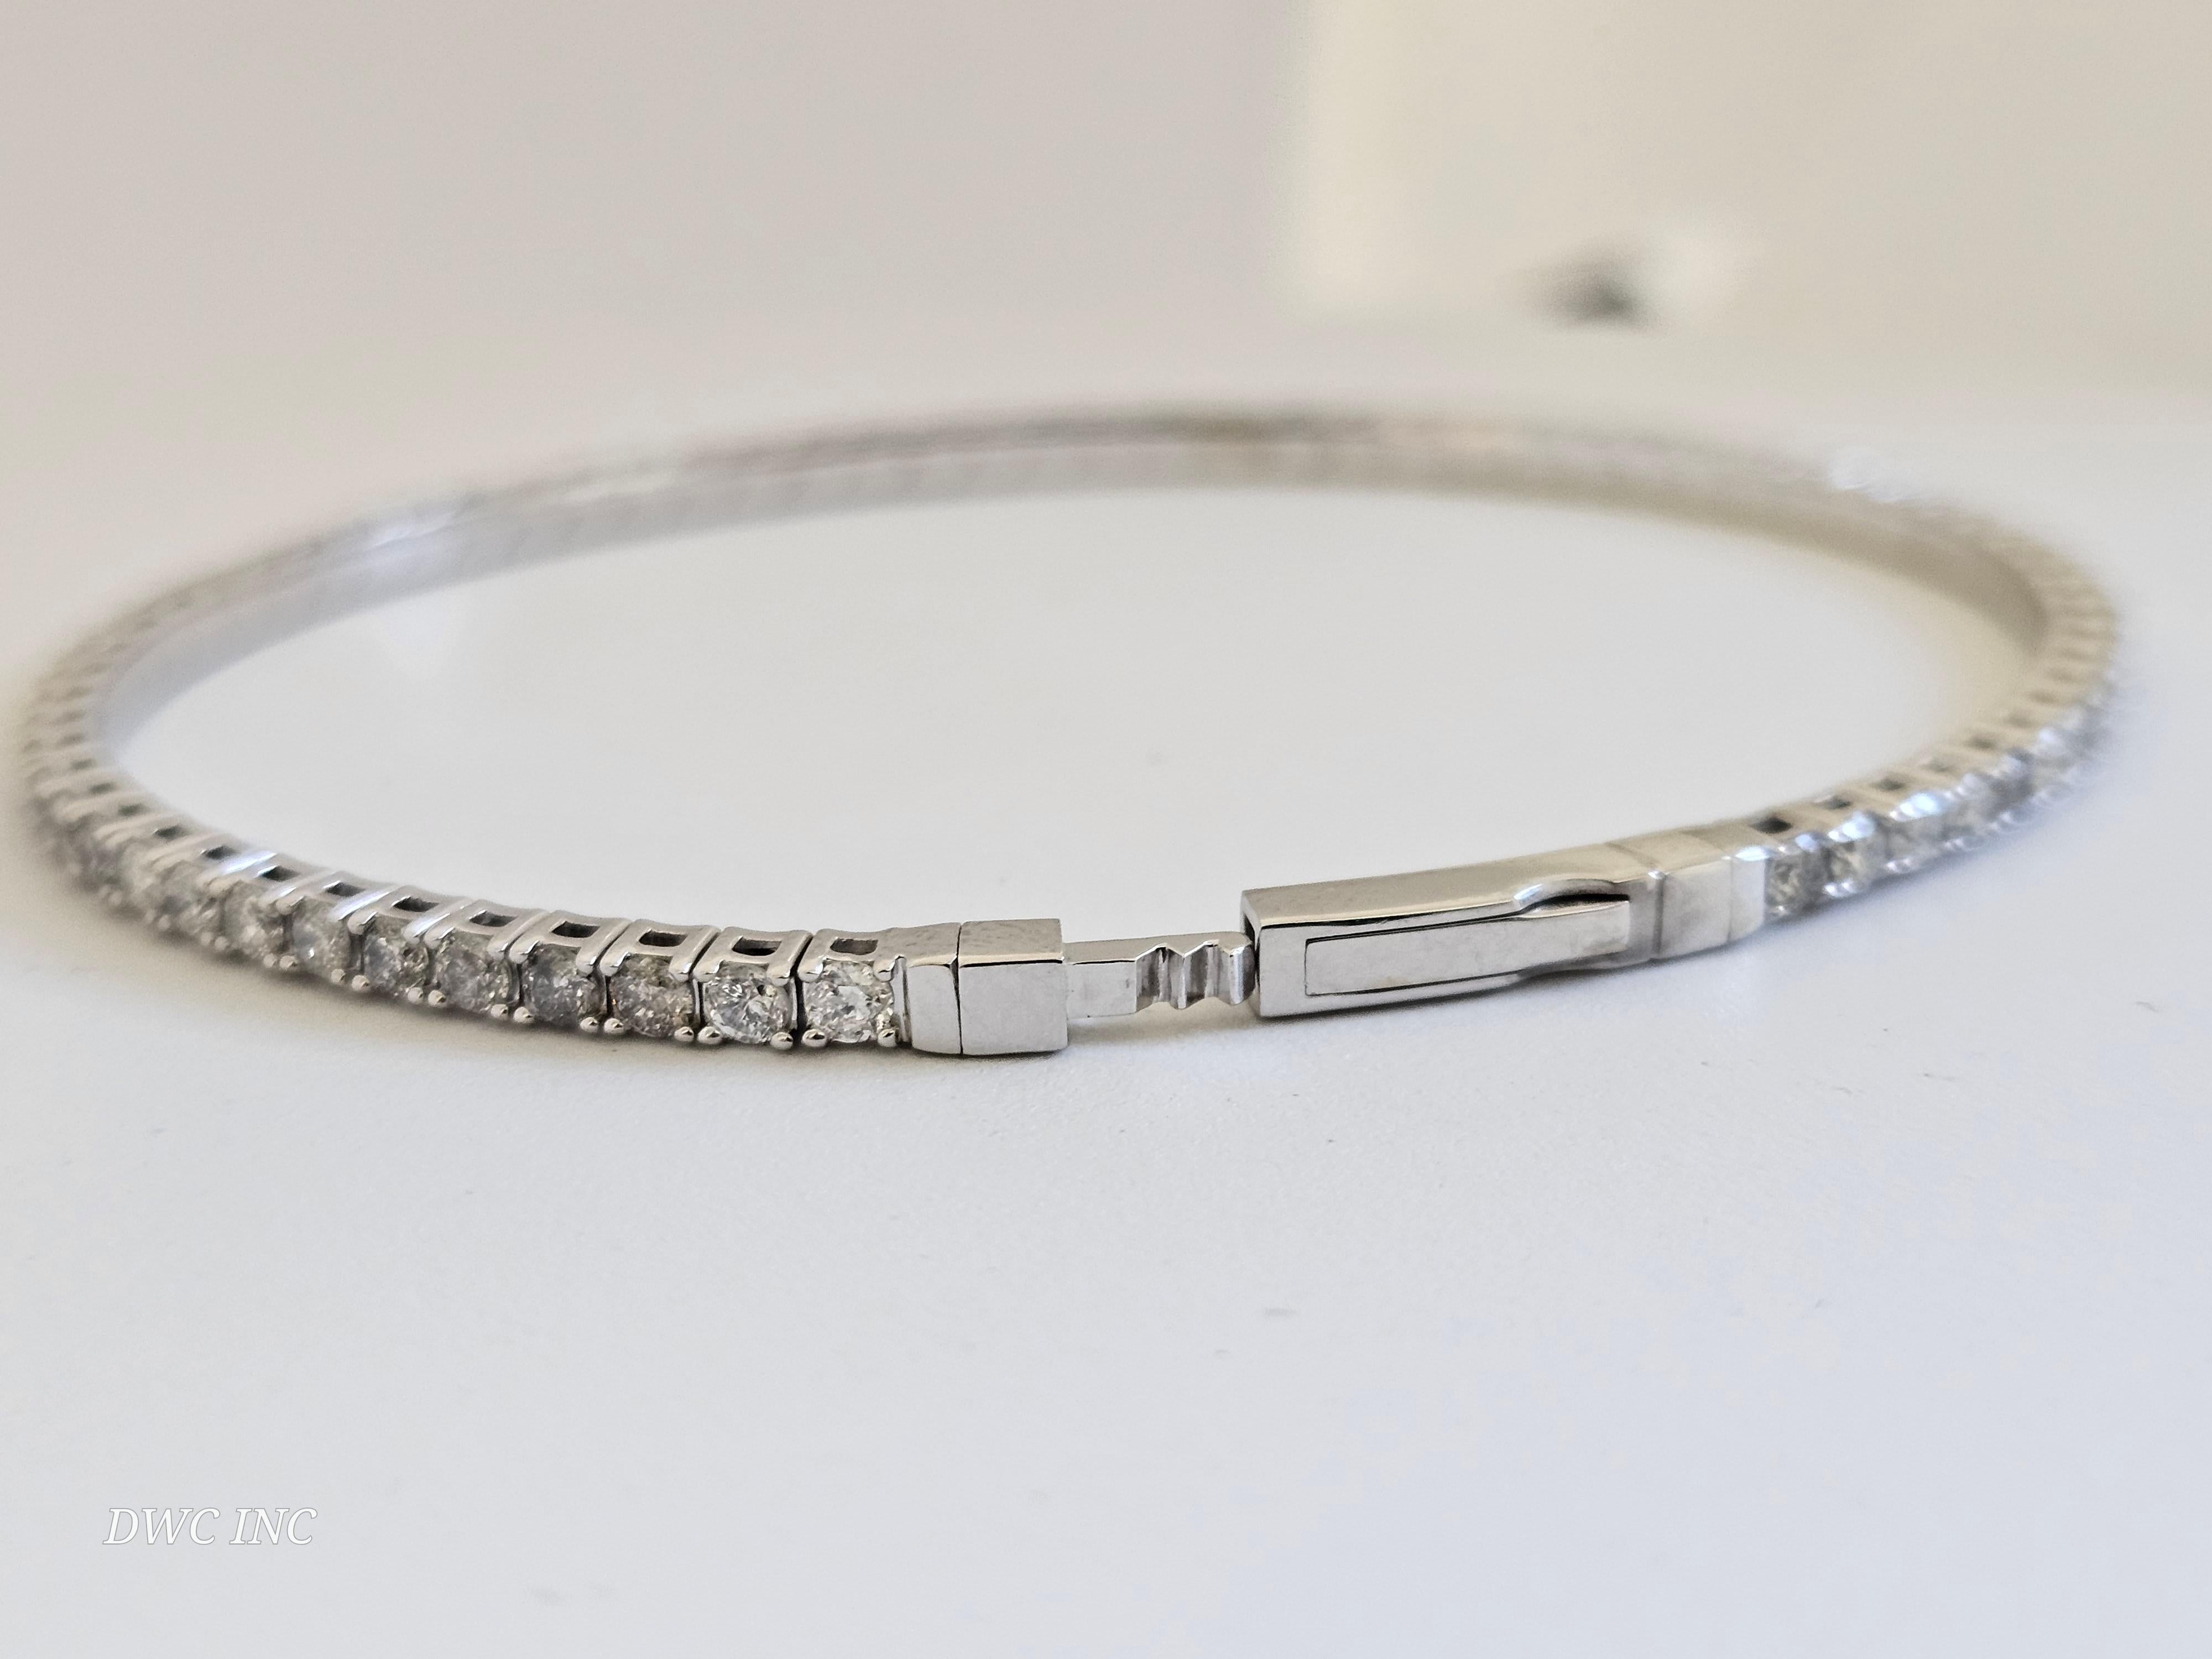 2.25 Carat Round Brilliant Cut Diamond Bangle Bracelet 14 Karat White Gold In New Condition For Sale In Great Neck, NY